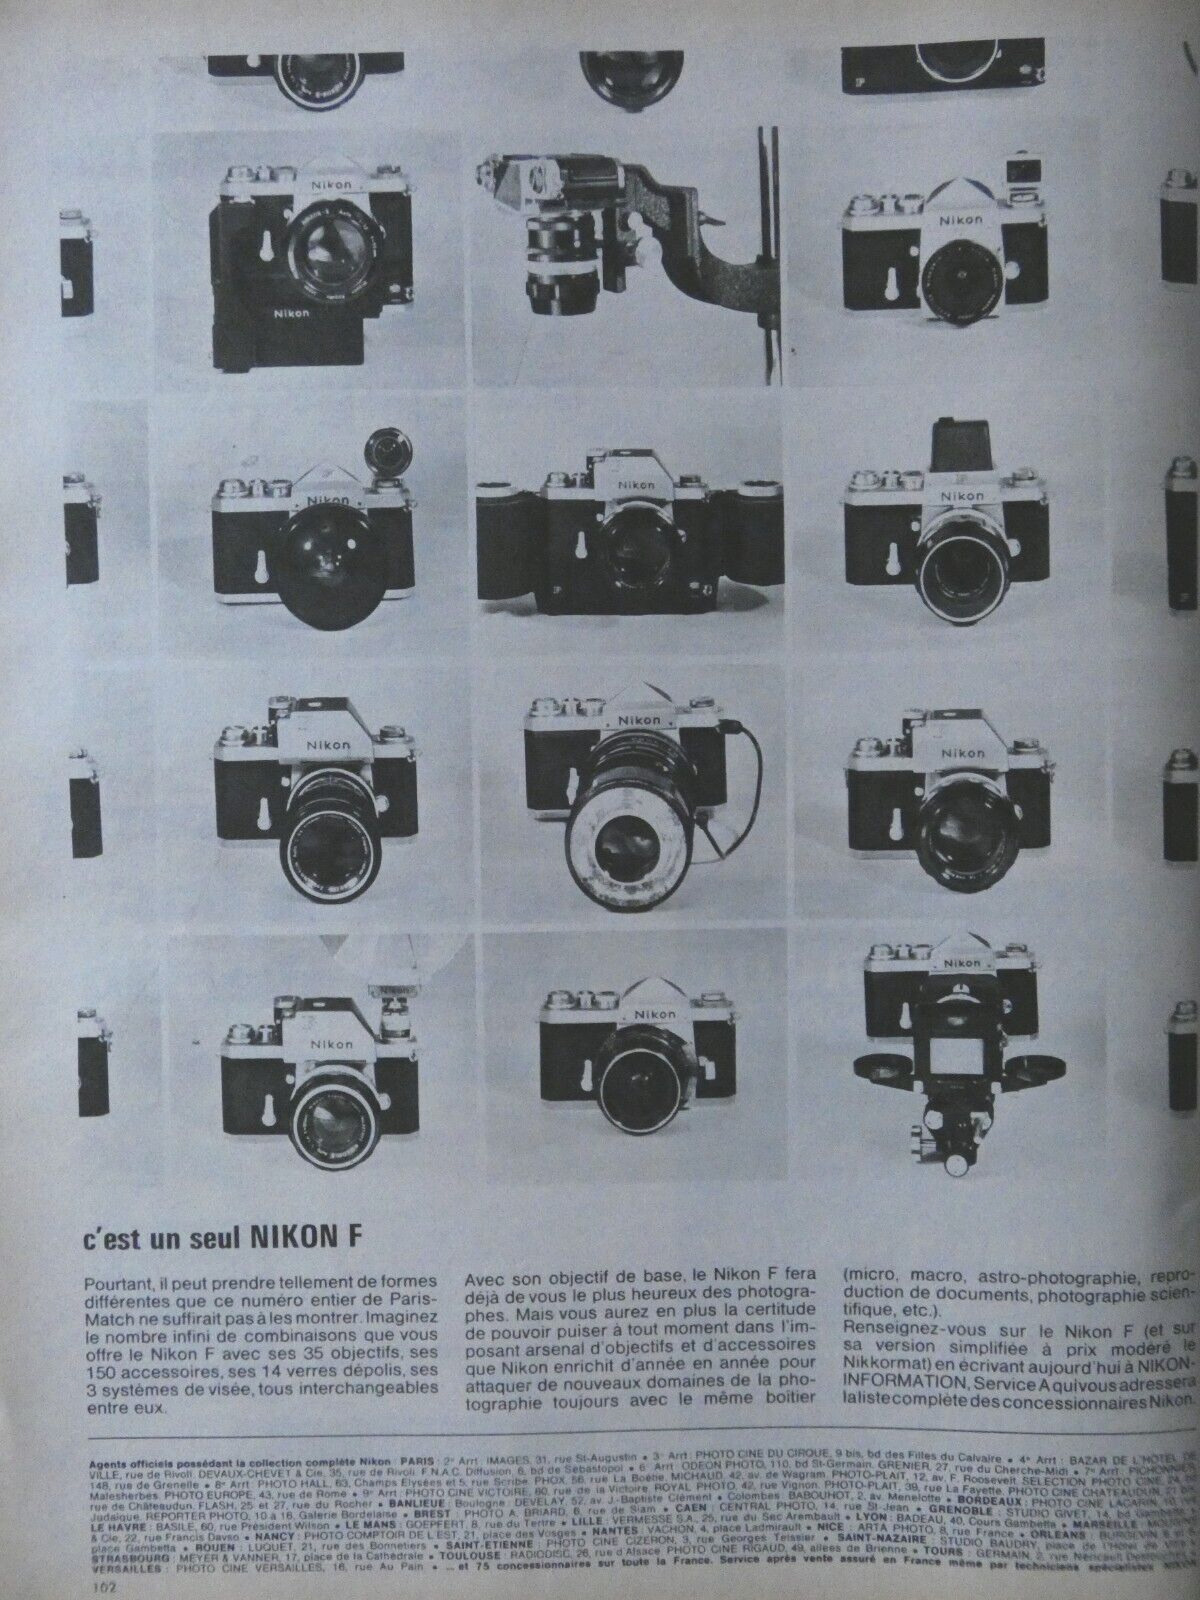 1967 NIKON F PRESS ADVERTISEMENT with 35 lenses and 150 accessories 14 lenses